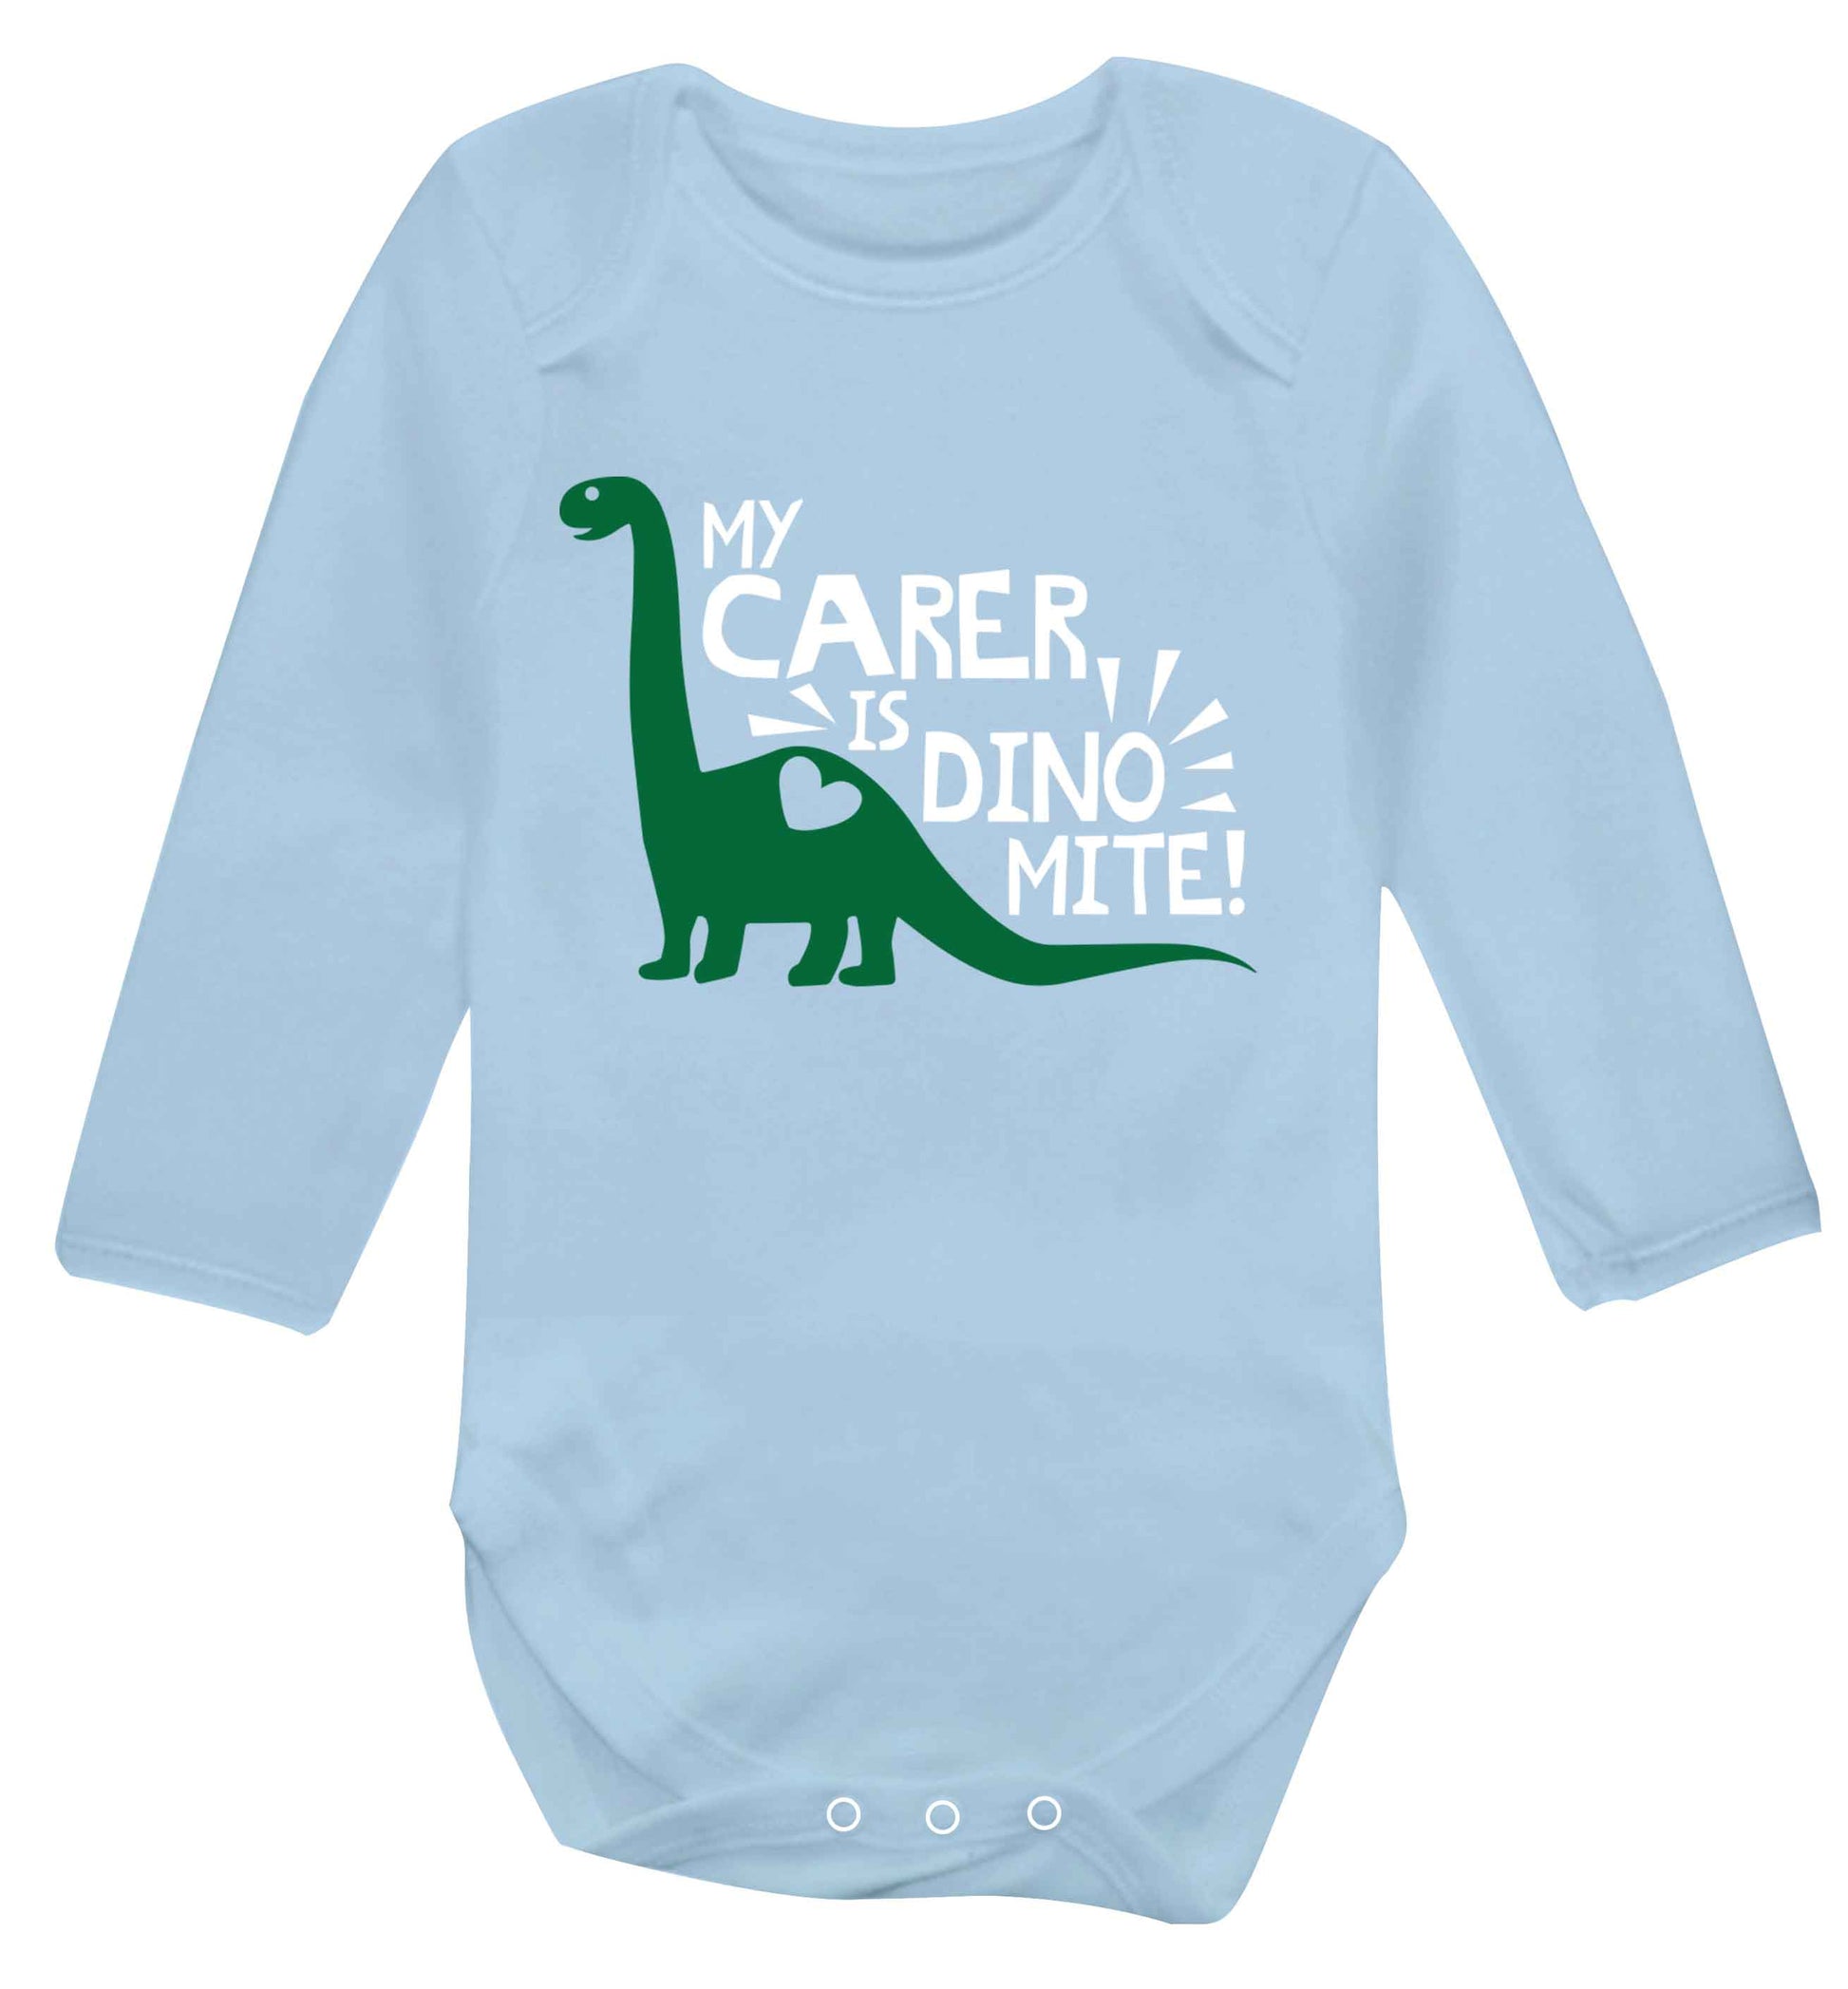 My carer is dinomite! Baby Vest long sleeved pale blue 6-12 months